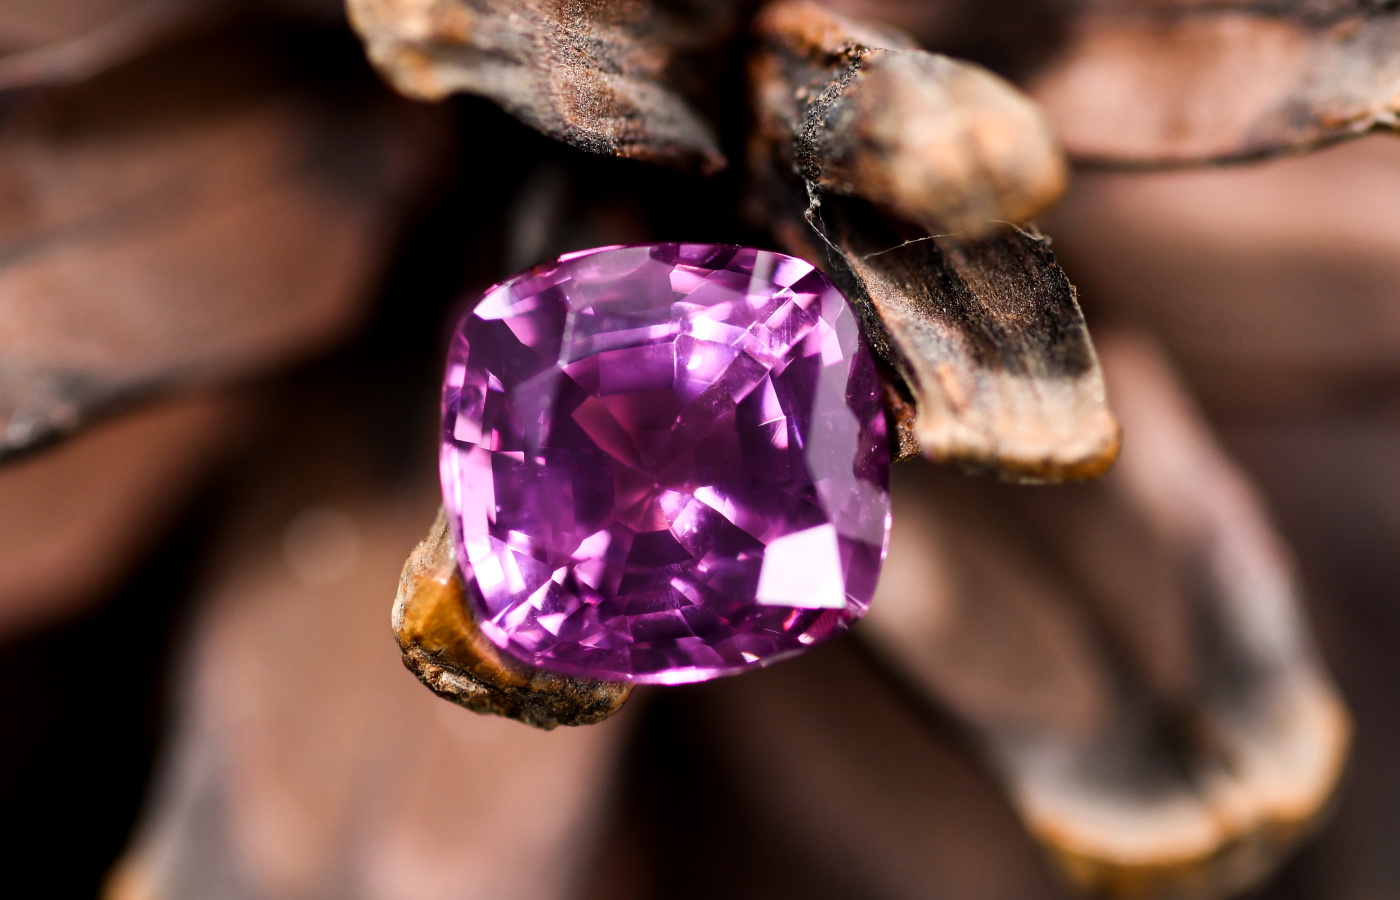 A sensational purplish-pink spinel of 6 carats from Tajikistan, crafted by Minehaus in Jaipur, India